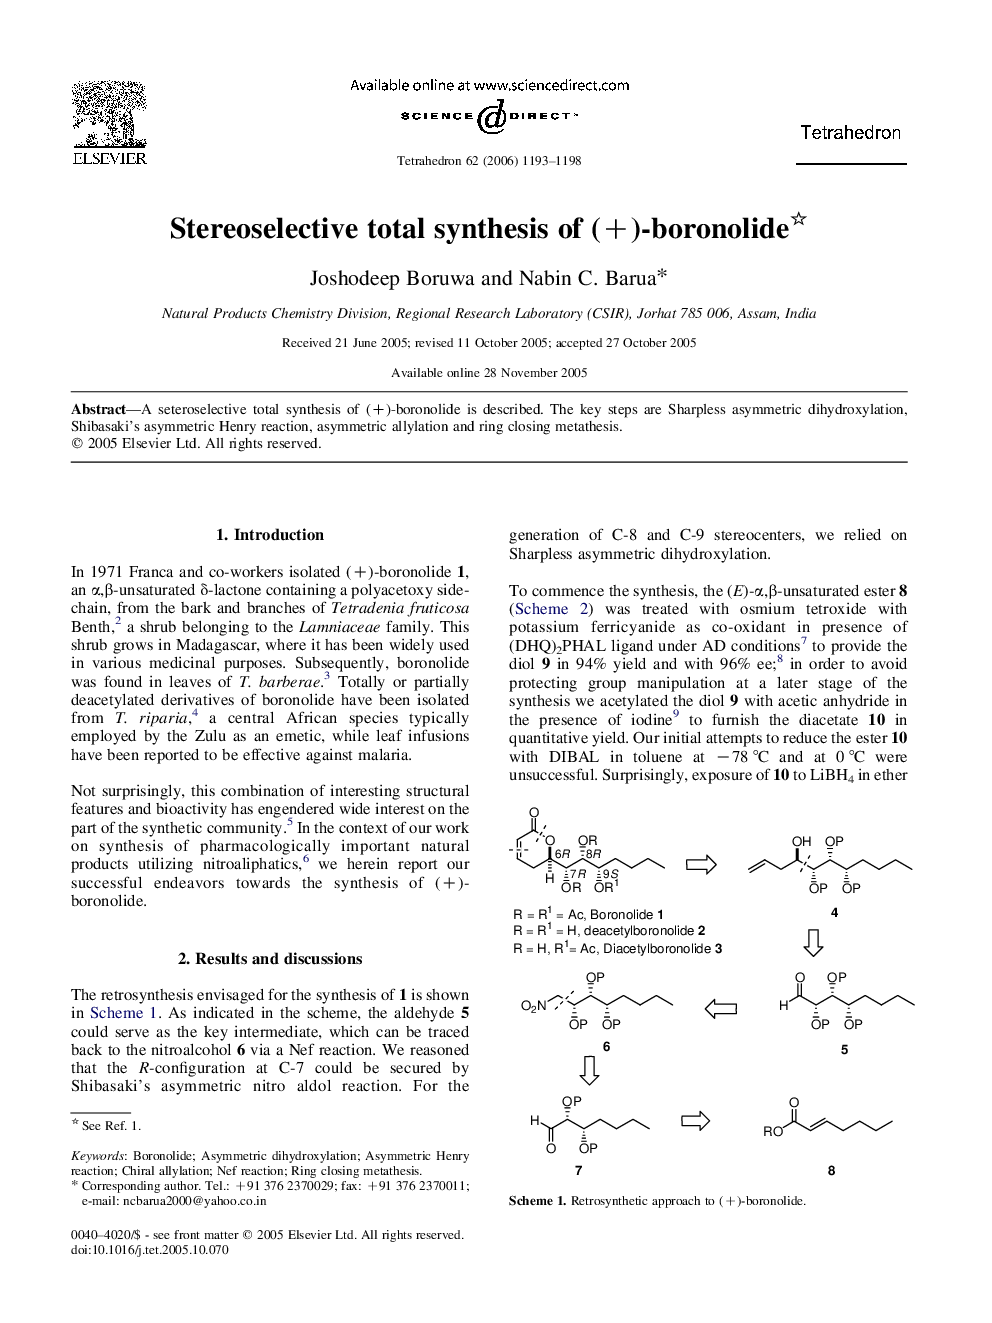 Stereoselective total synthesis of (+)-boronolide